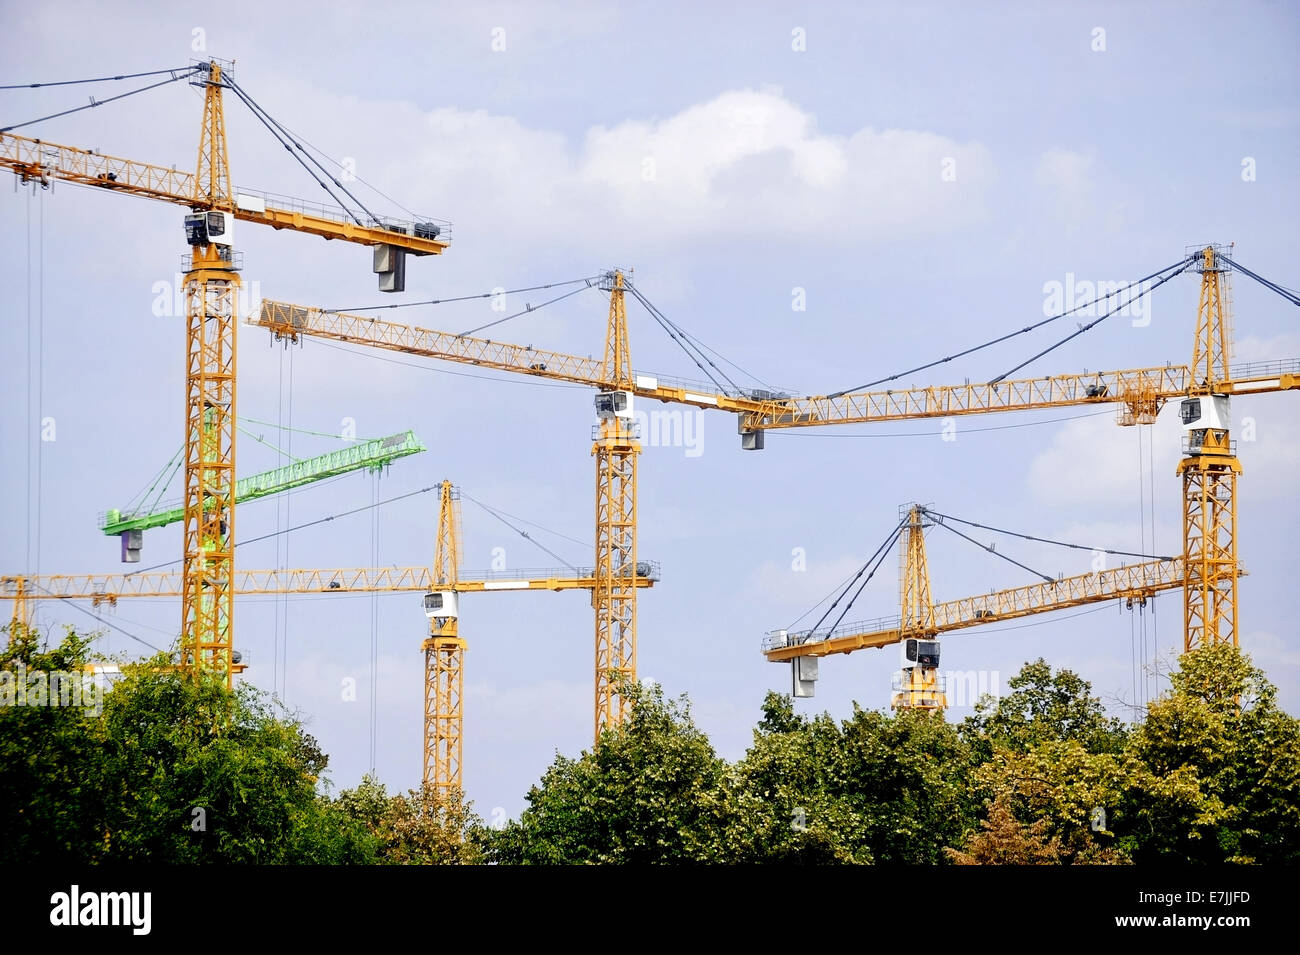 Several construction cranes are seen above a tree line Stock Photo